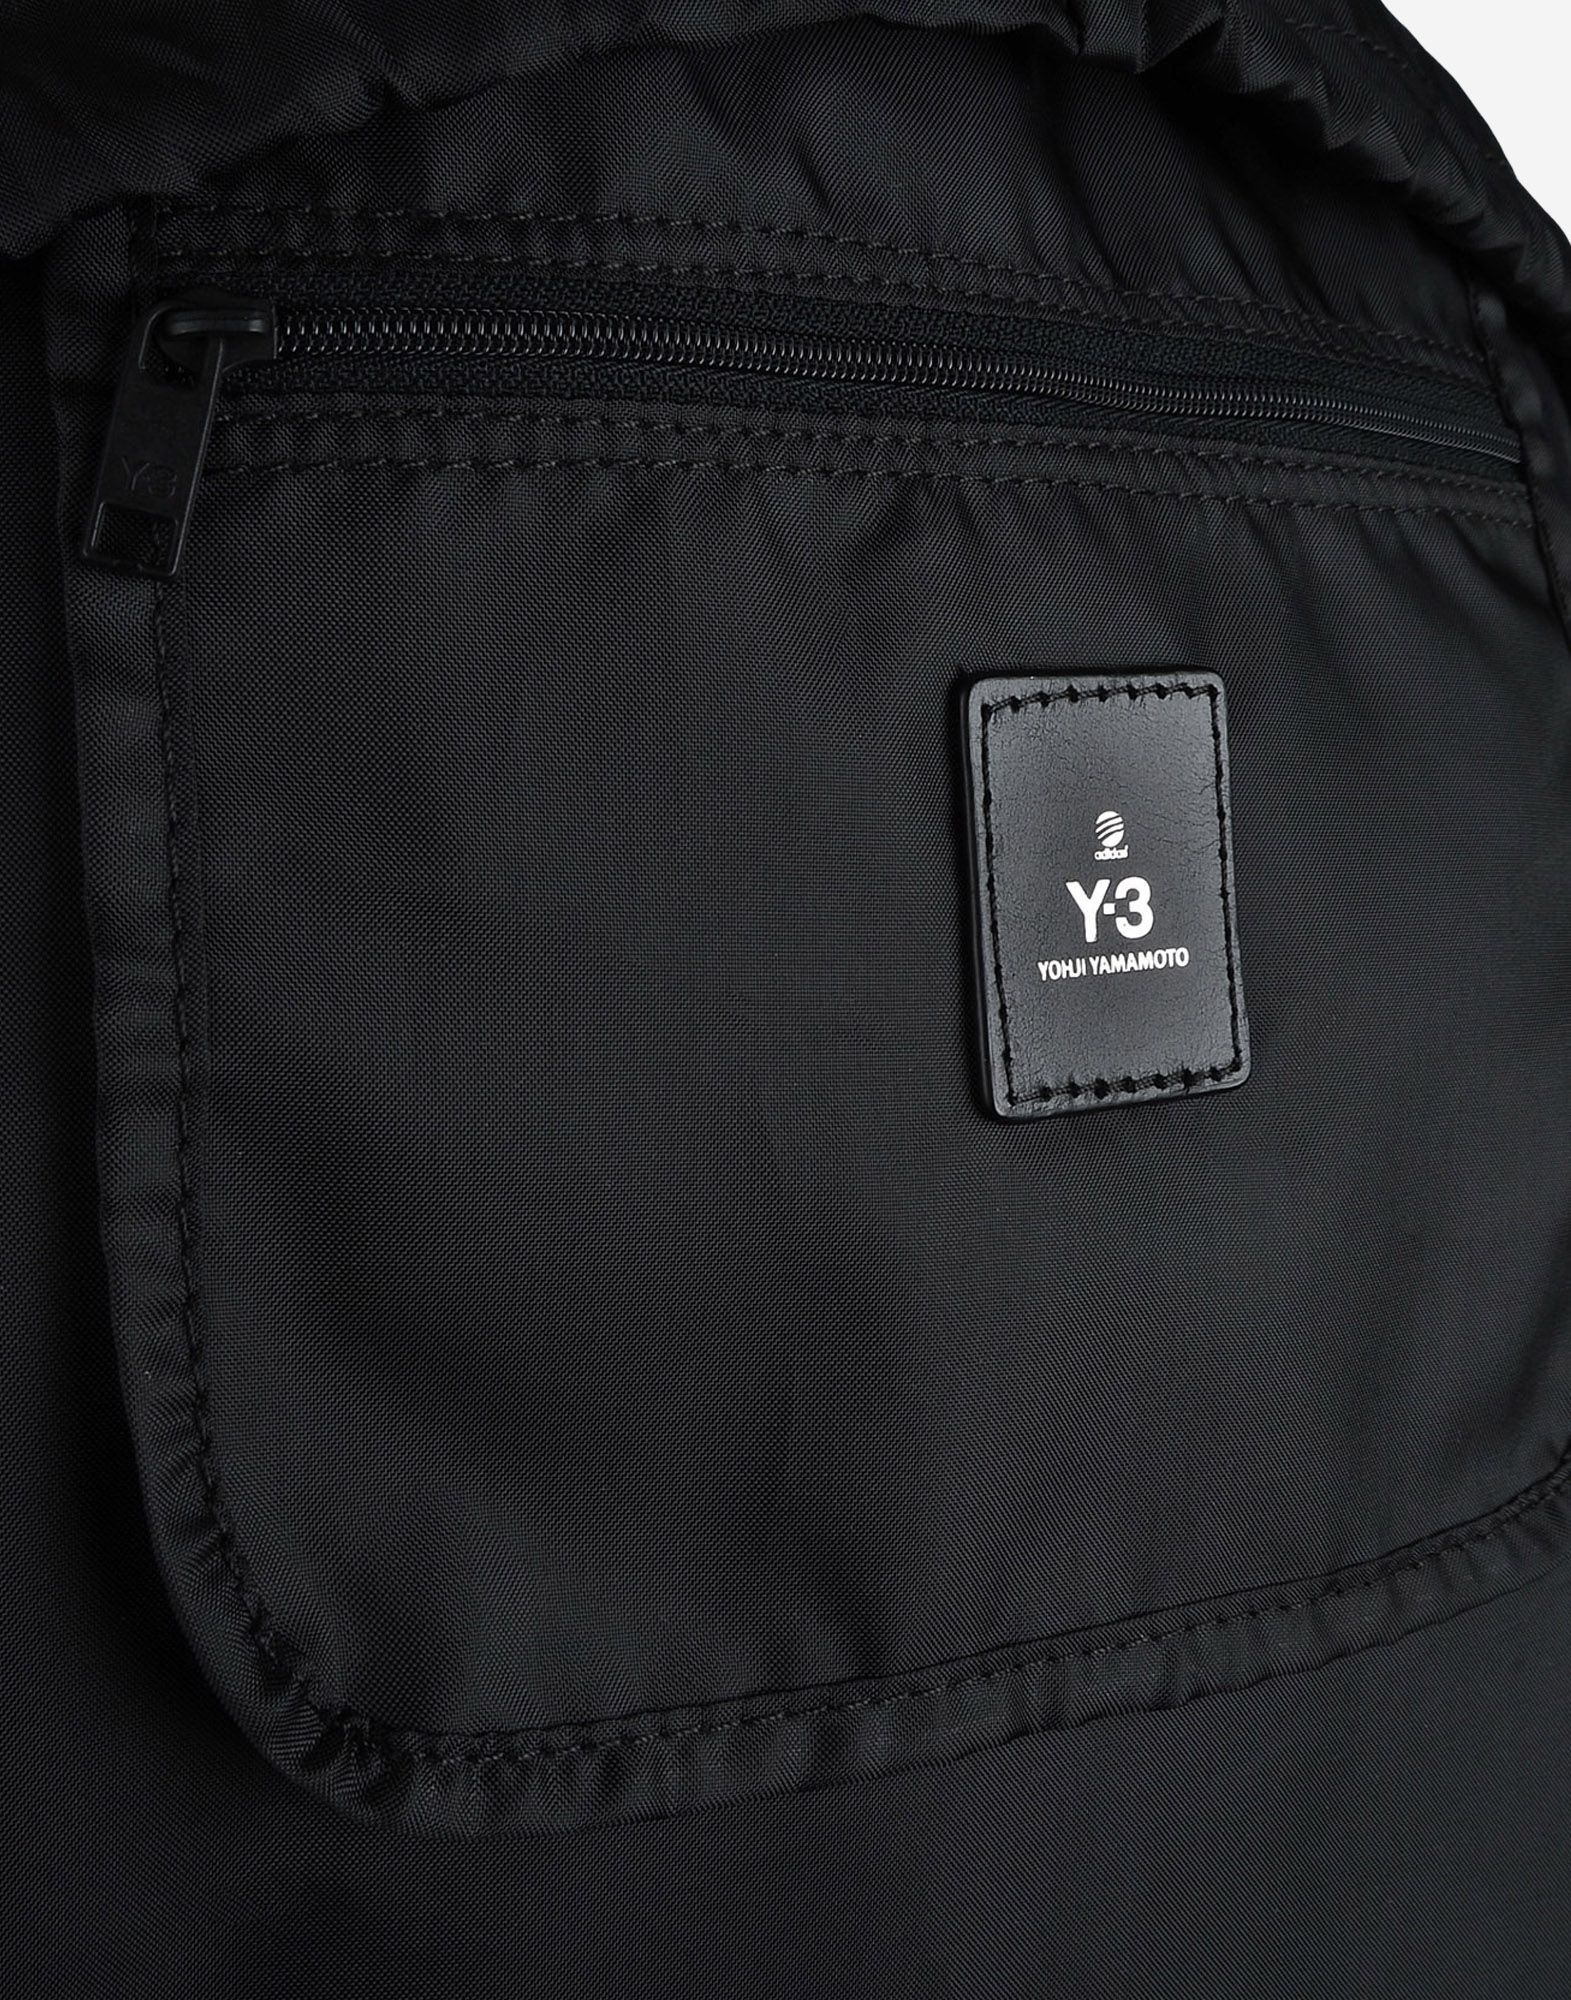 Y 3 Future Sport Backpack for Women | Adidas Y-3 Official Store